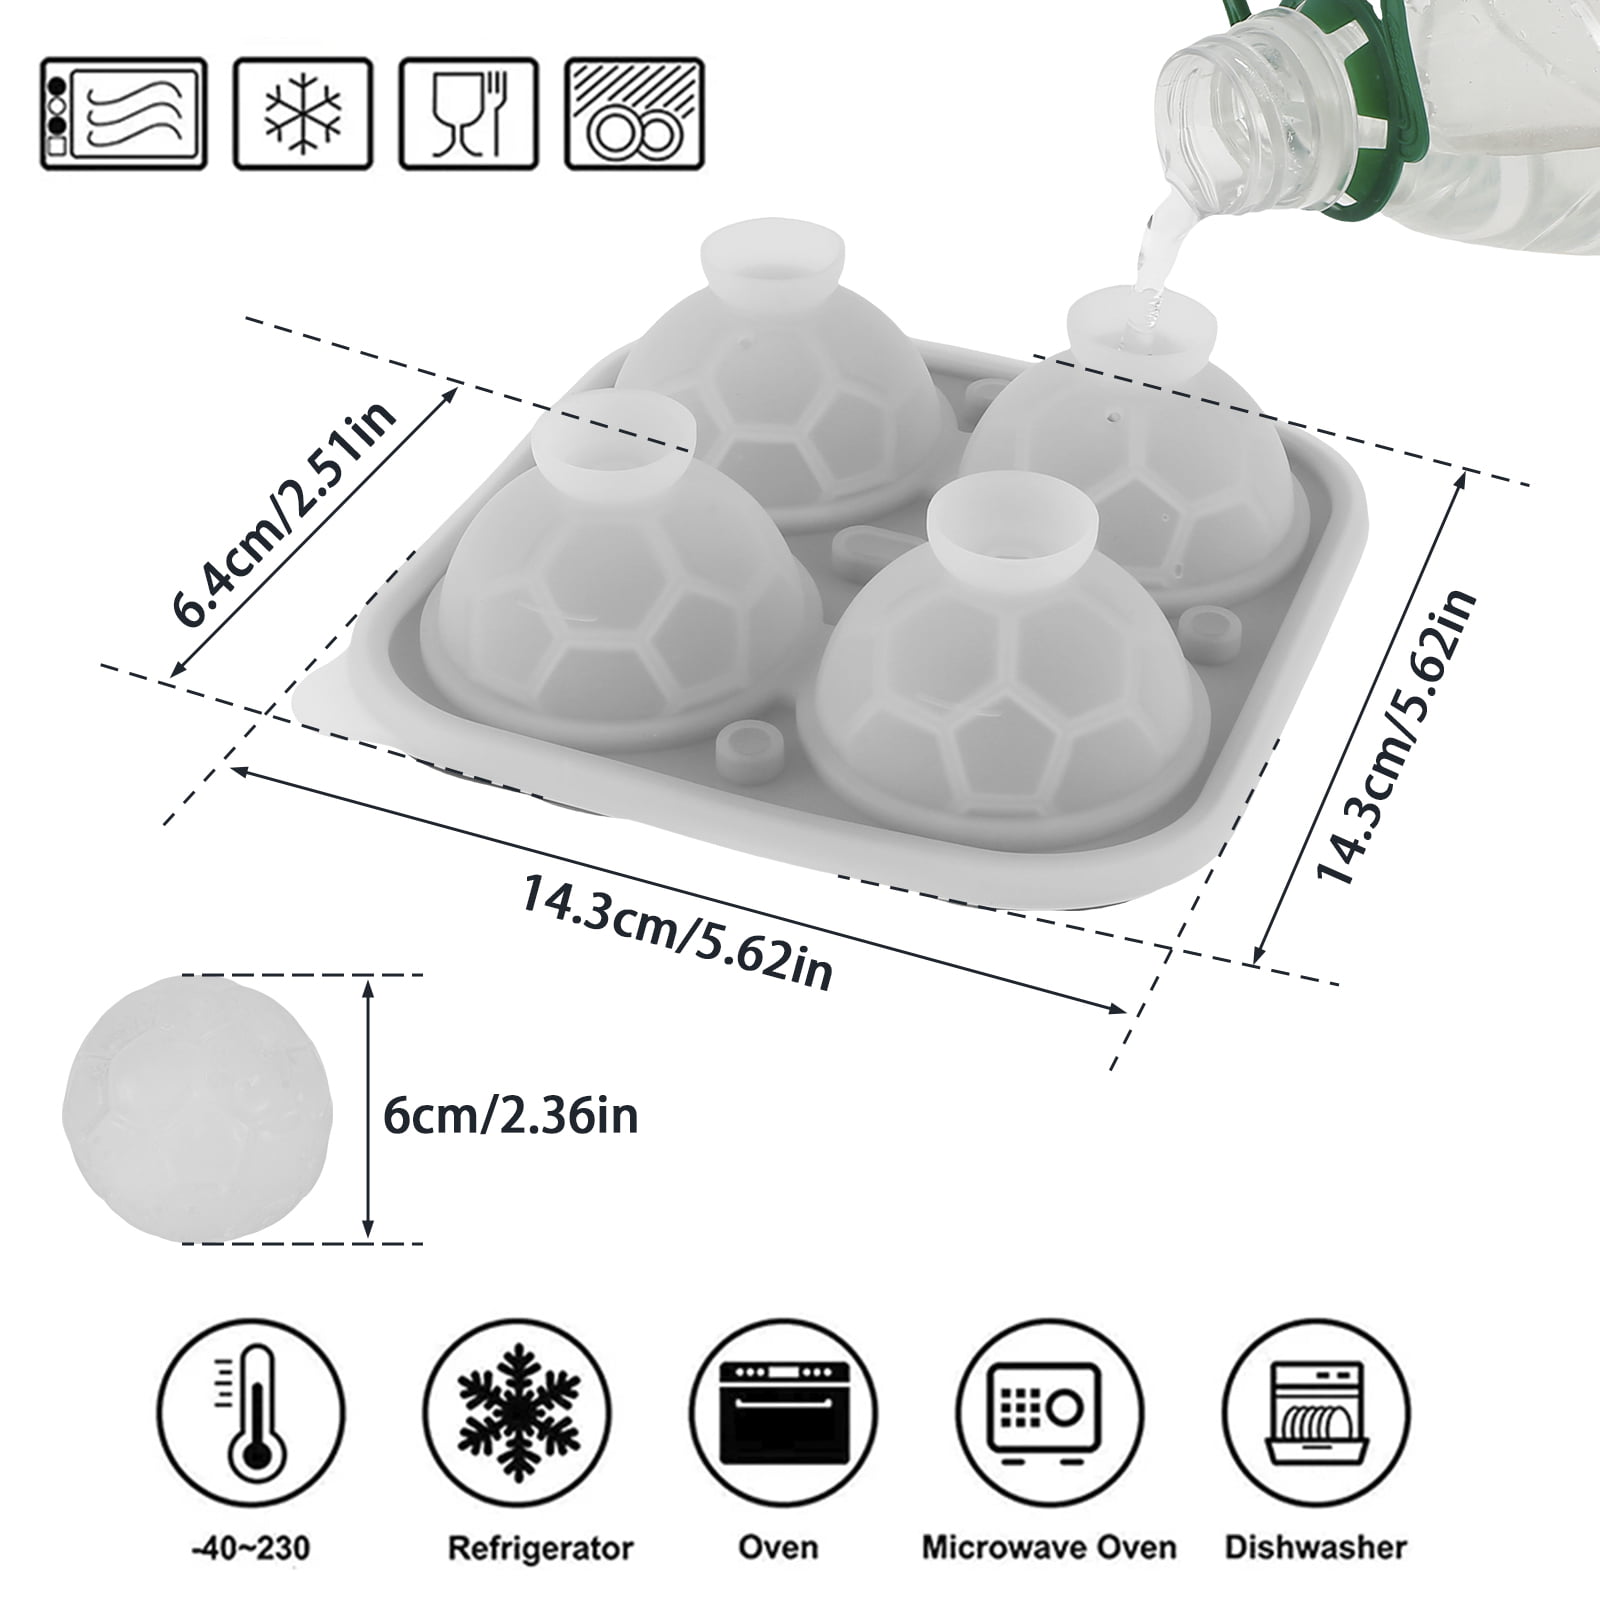  FOSOE Golf Ball Shaped Ice Cube Tray, Large Ball Shapes Ice  Trays, Sphere Ice Molds, Round Ice Ball Maker Molds for Whiskey, Cocktails,  Bourbon, Sport Lover, Fun Shape Gift, with Funnel